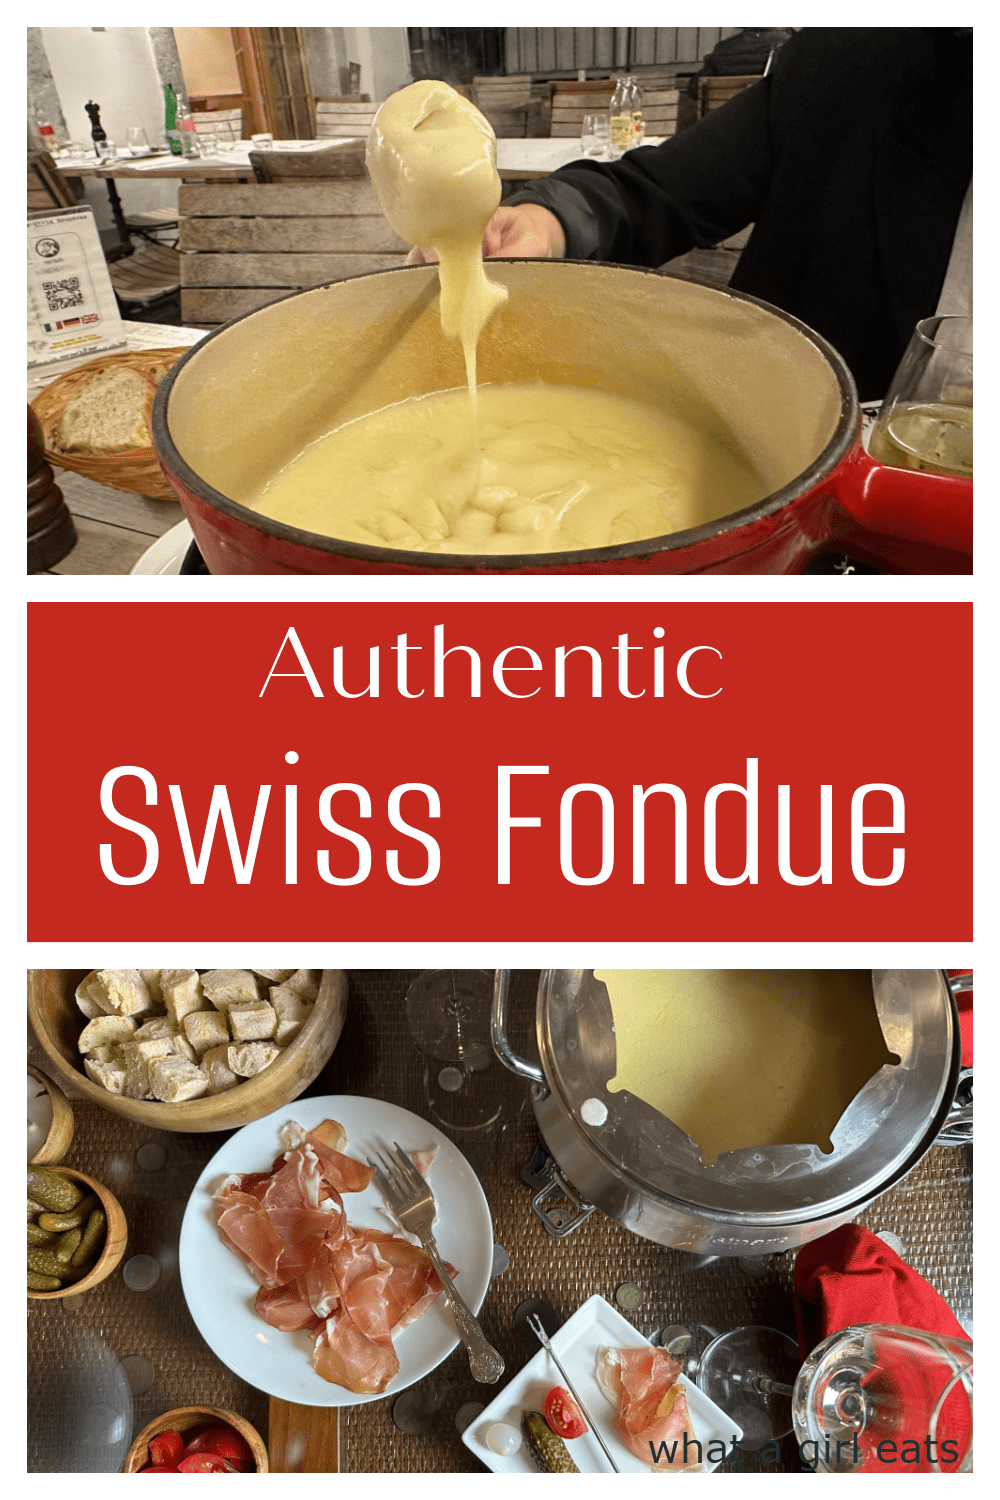 Cheese fondue is a classic Swiss dish popular in the Alps. This recipe serves four as a main dish and 8 as an appetizer.